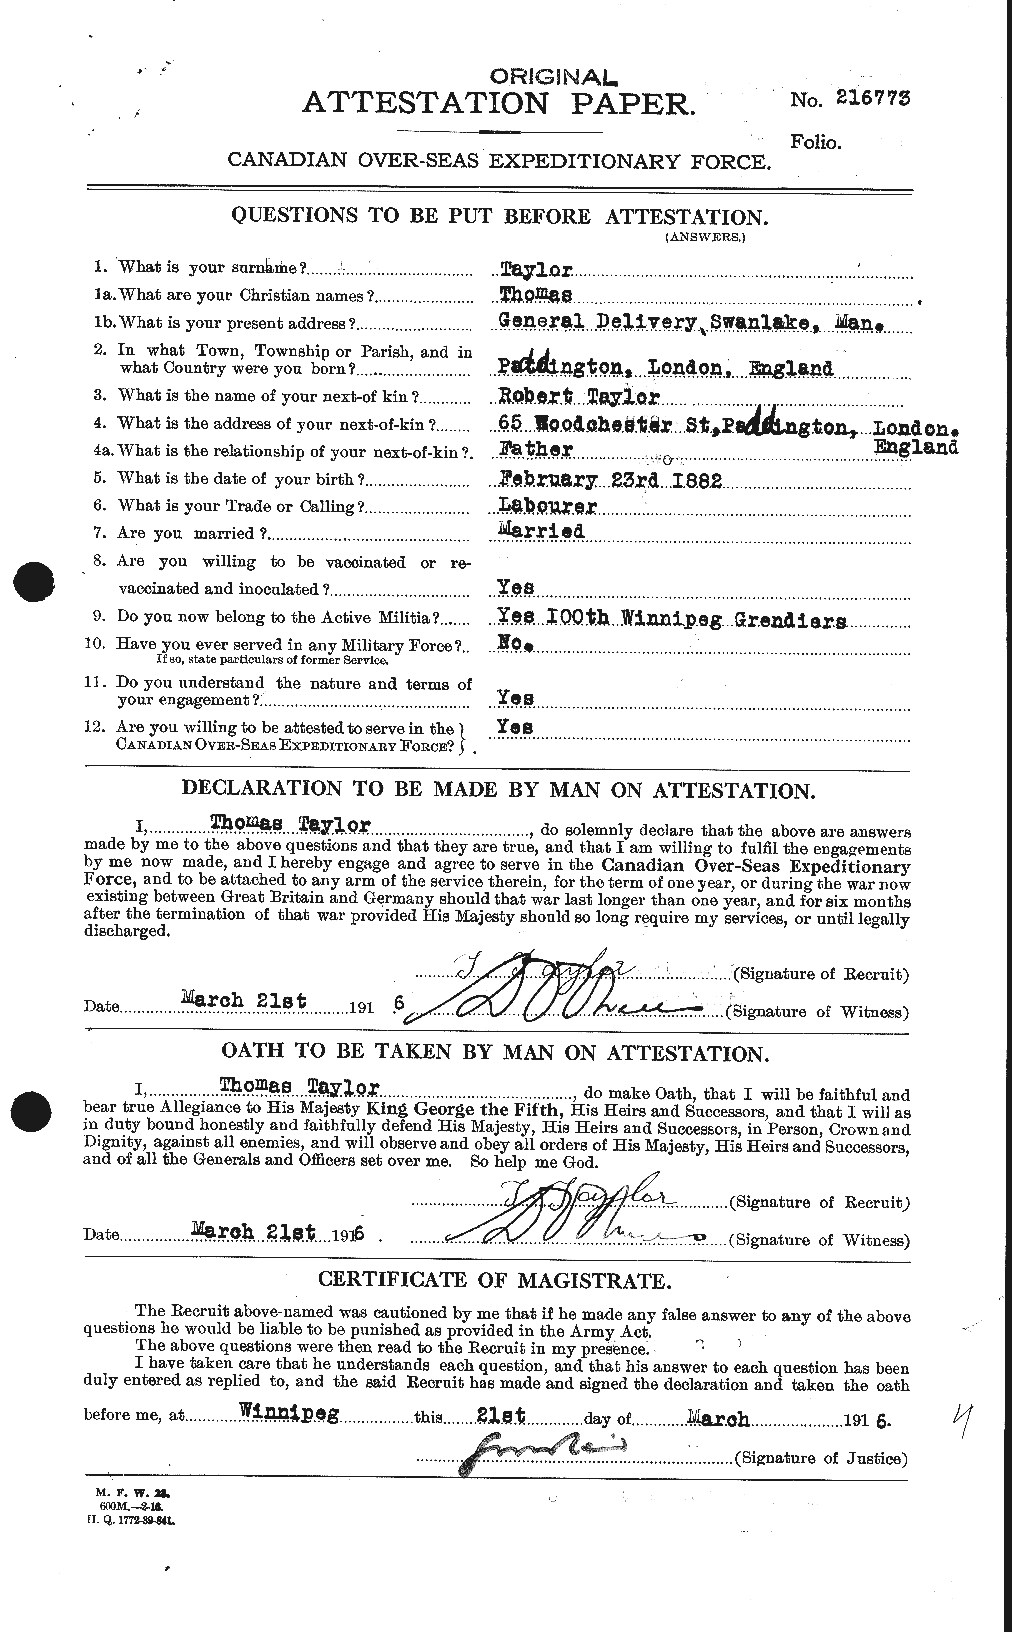 Personnel Records of the First World War - CEF 627949a